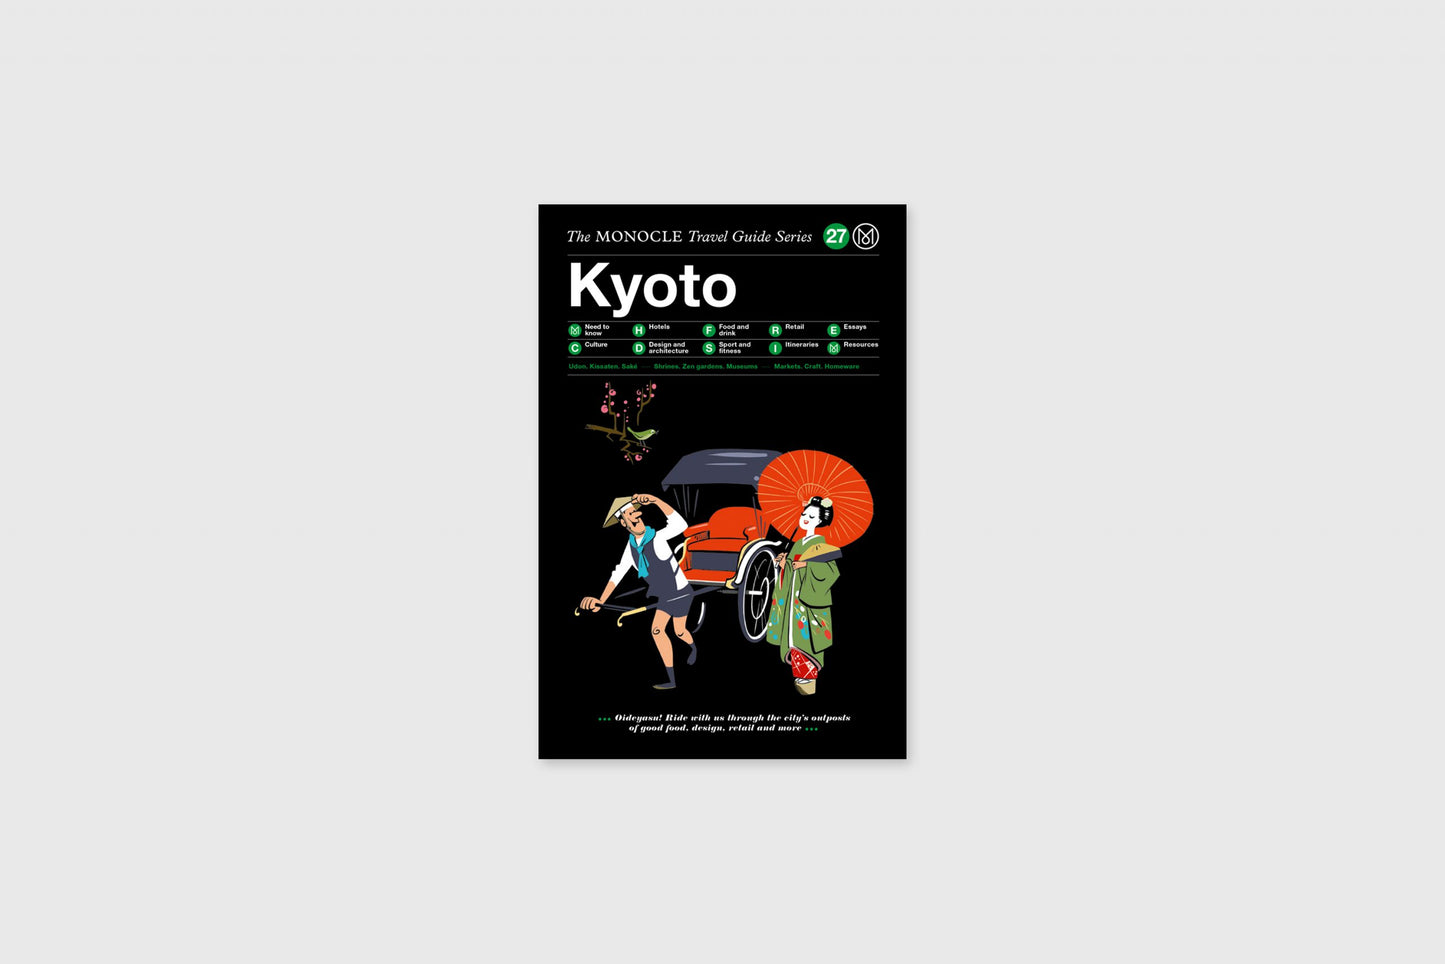 Kyoto: The Monocle Travel Guide Series